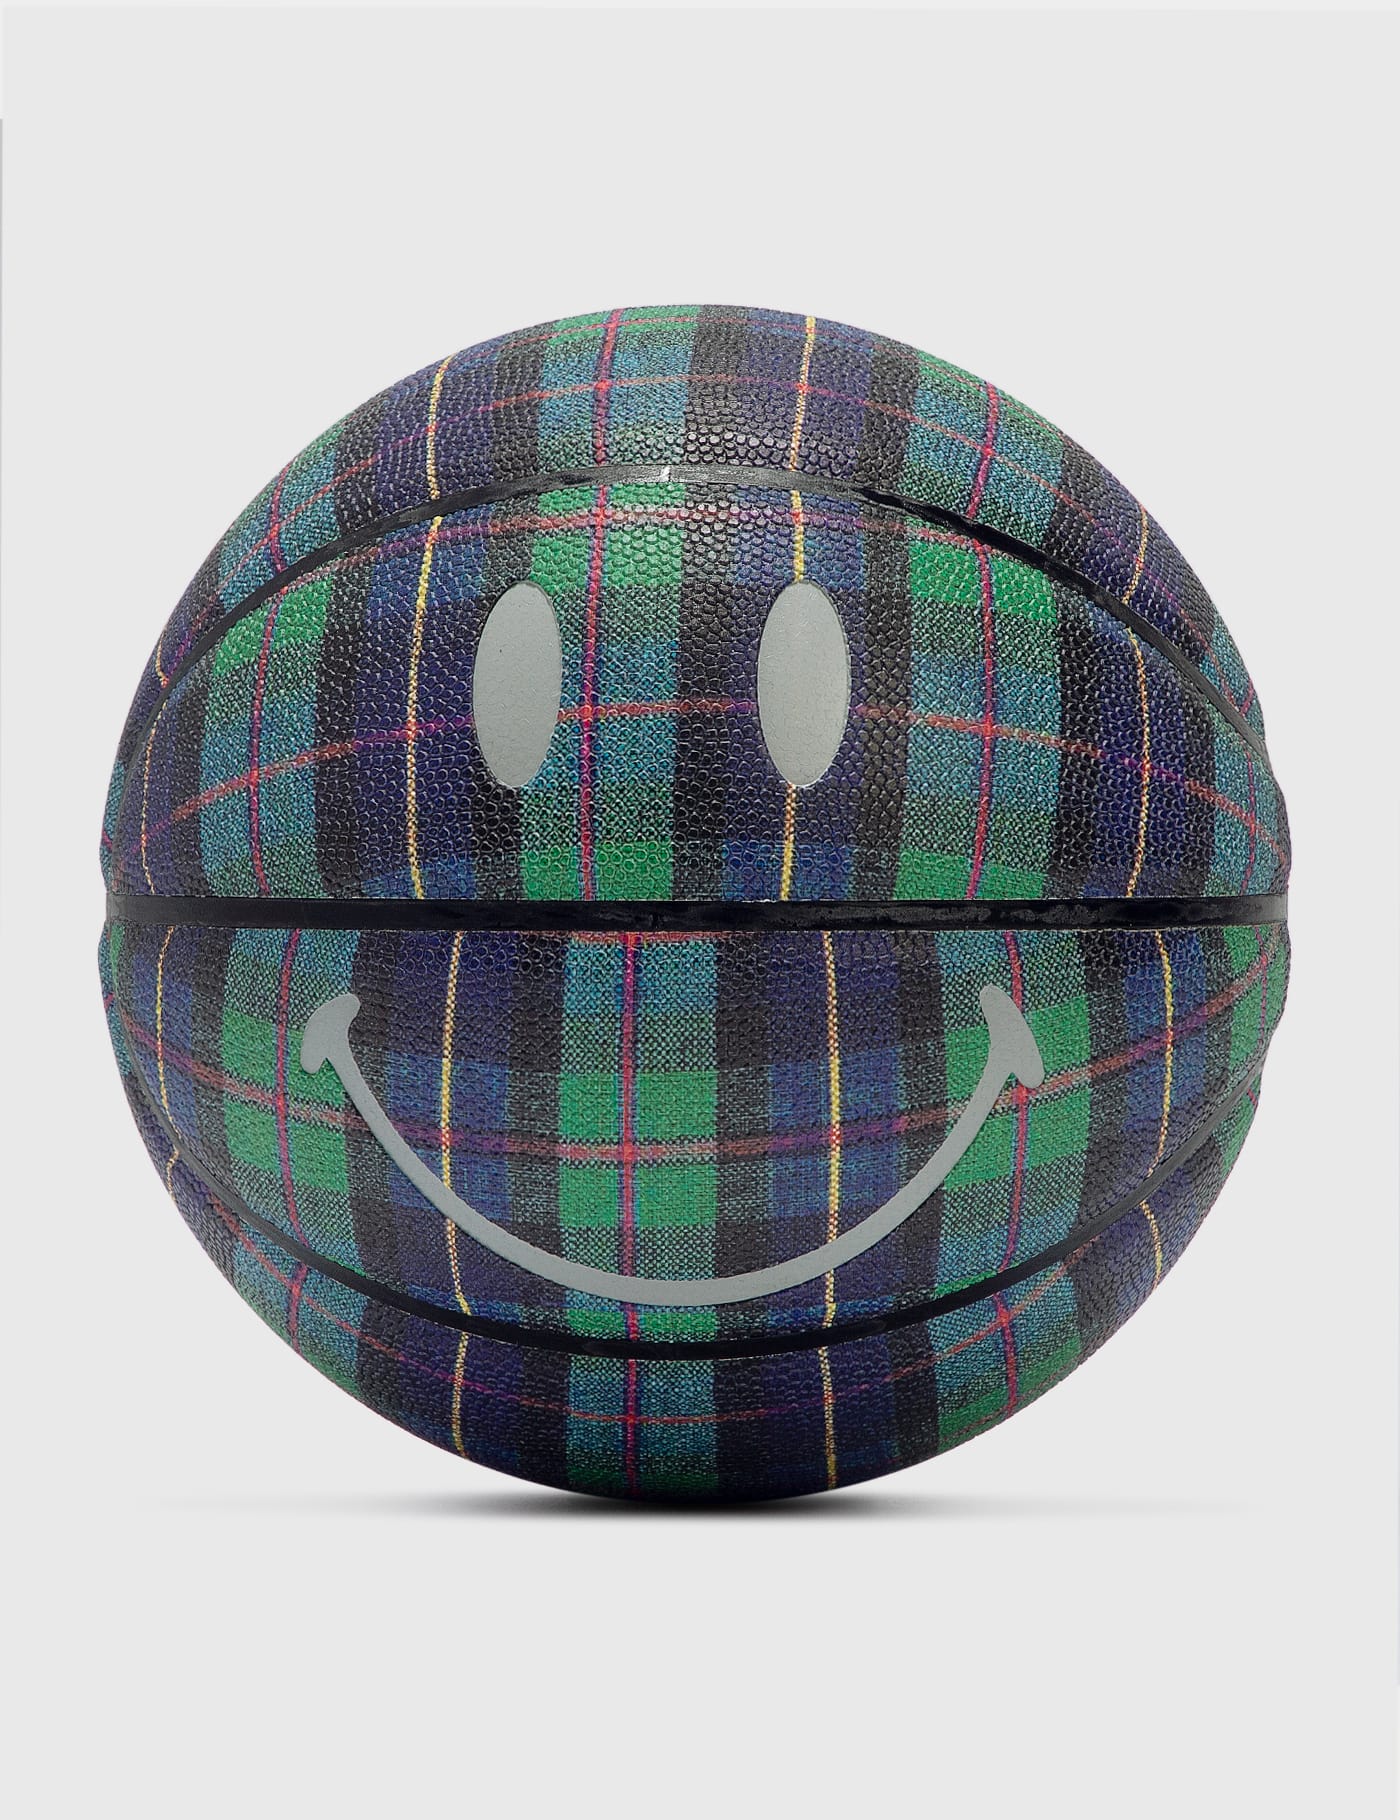 Chinatown Market - Smiley Money Ball | HBX - Globally Curated 